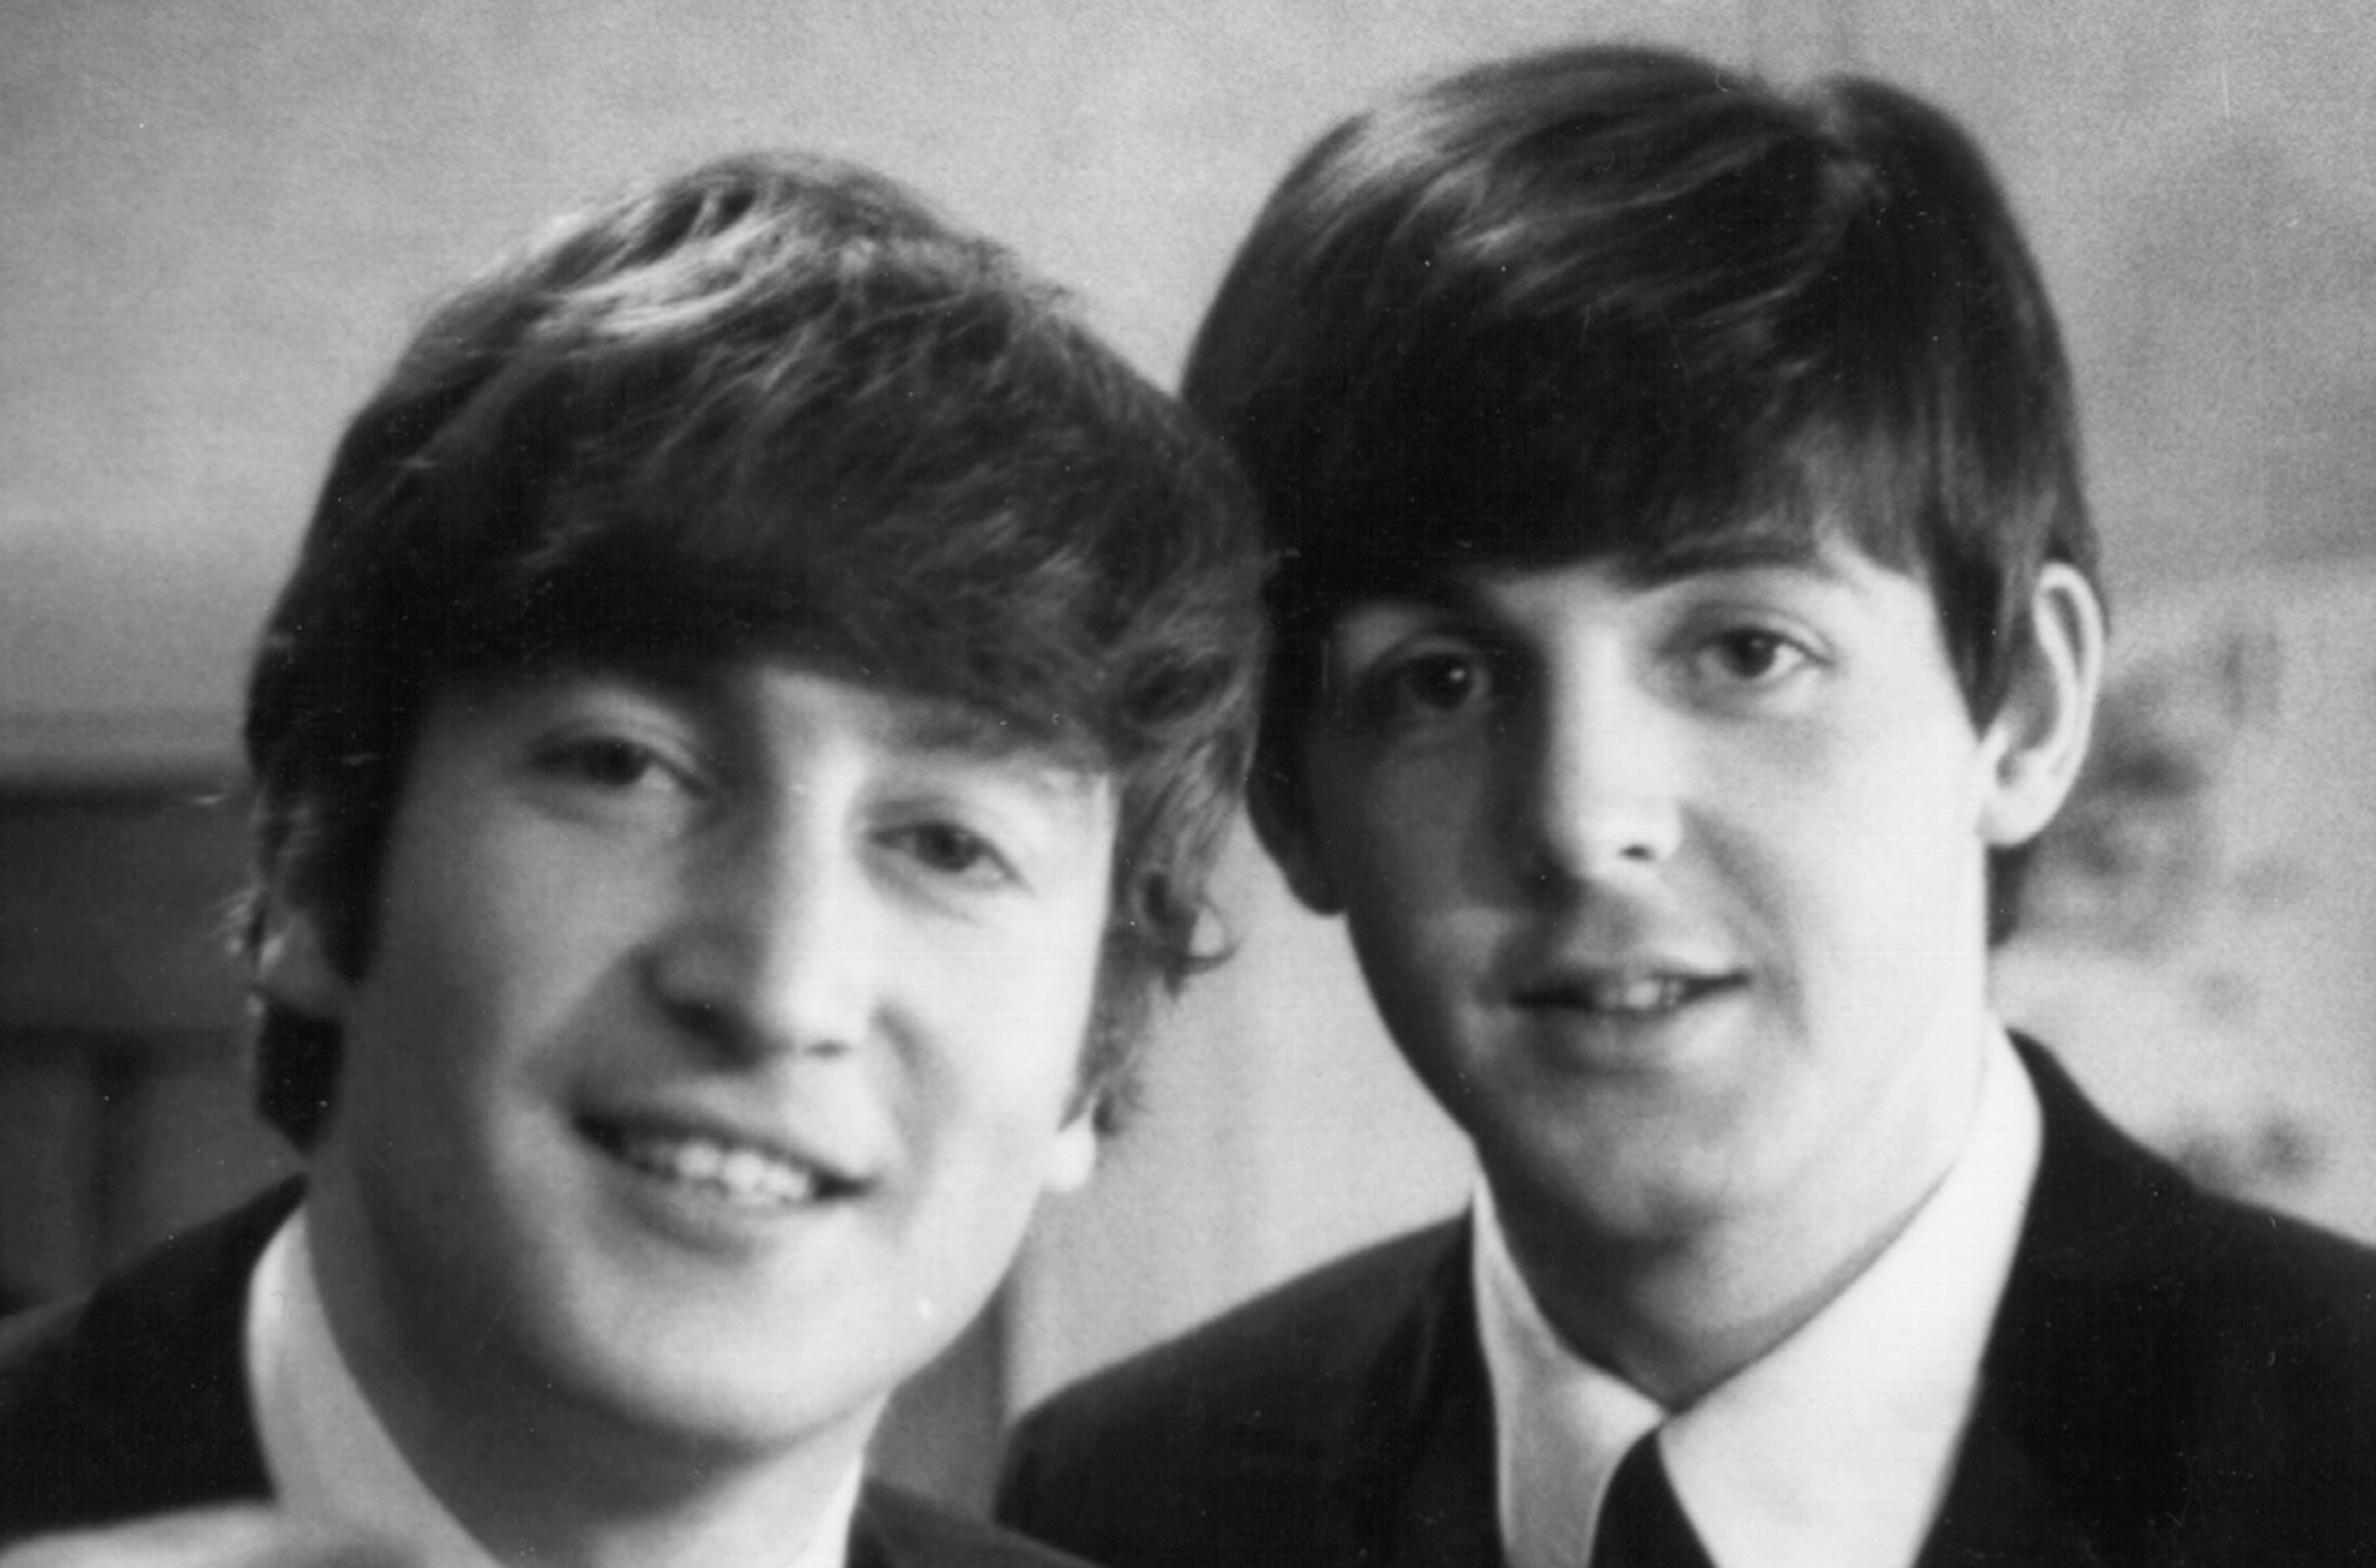 John Lennon and Paul McCartney with mop top haircuts